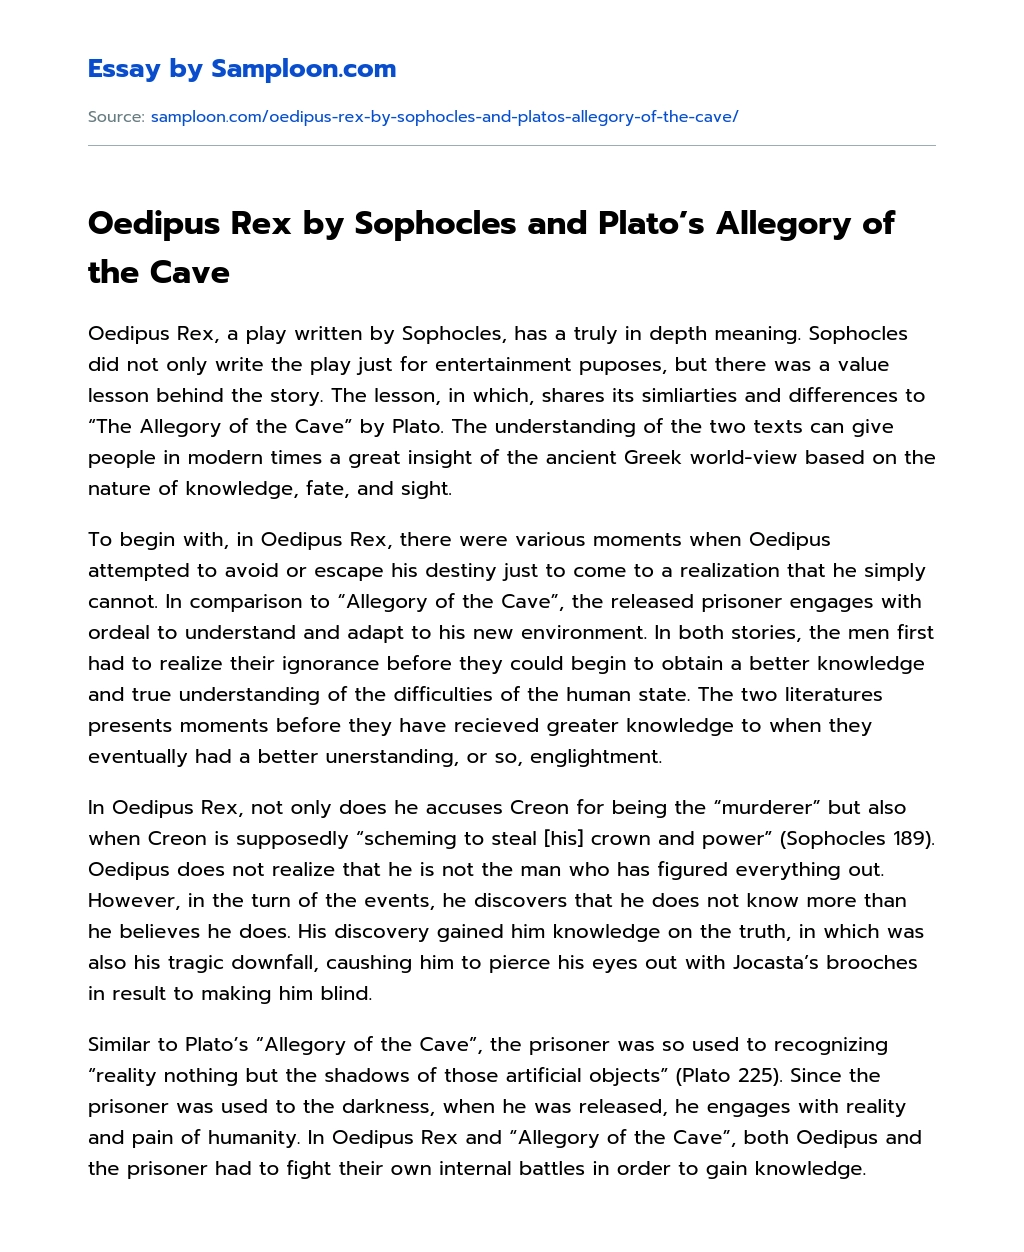 Oedipus Rex by Sophocles and Plato’s Allegory of the Cave essay